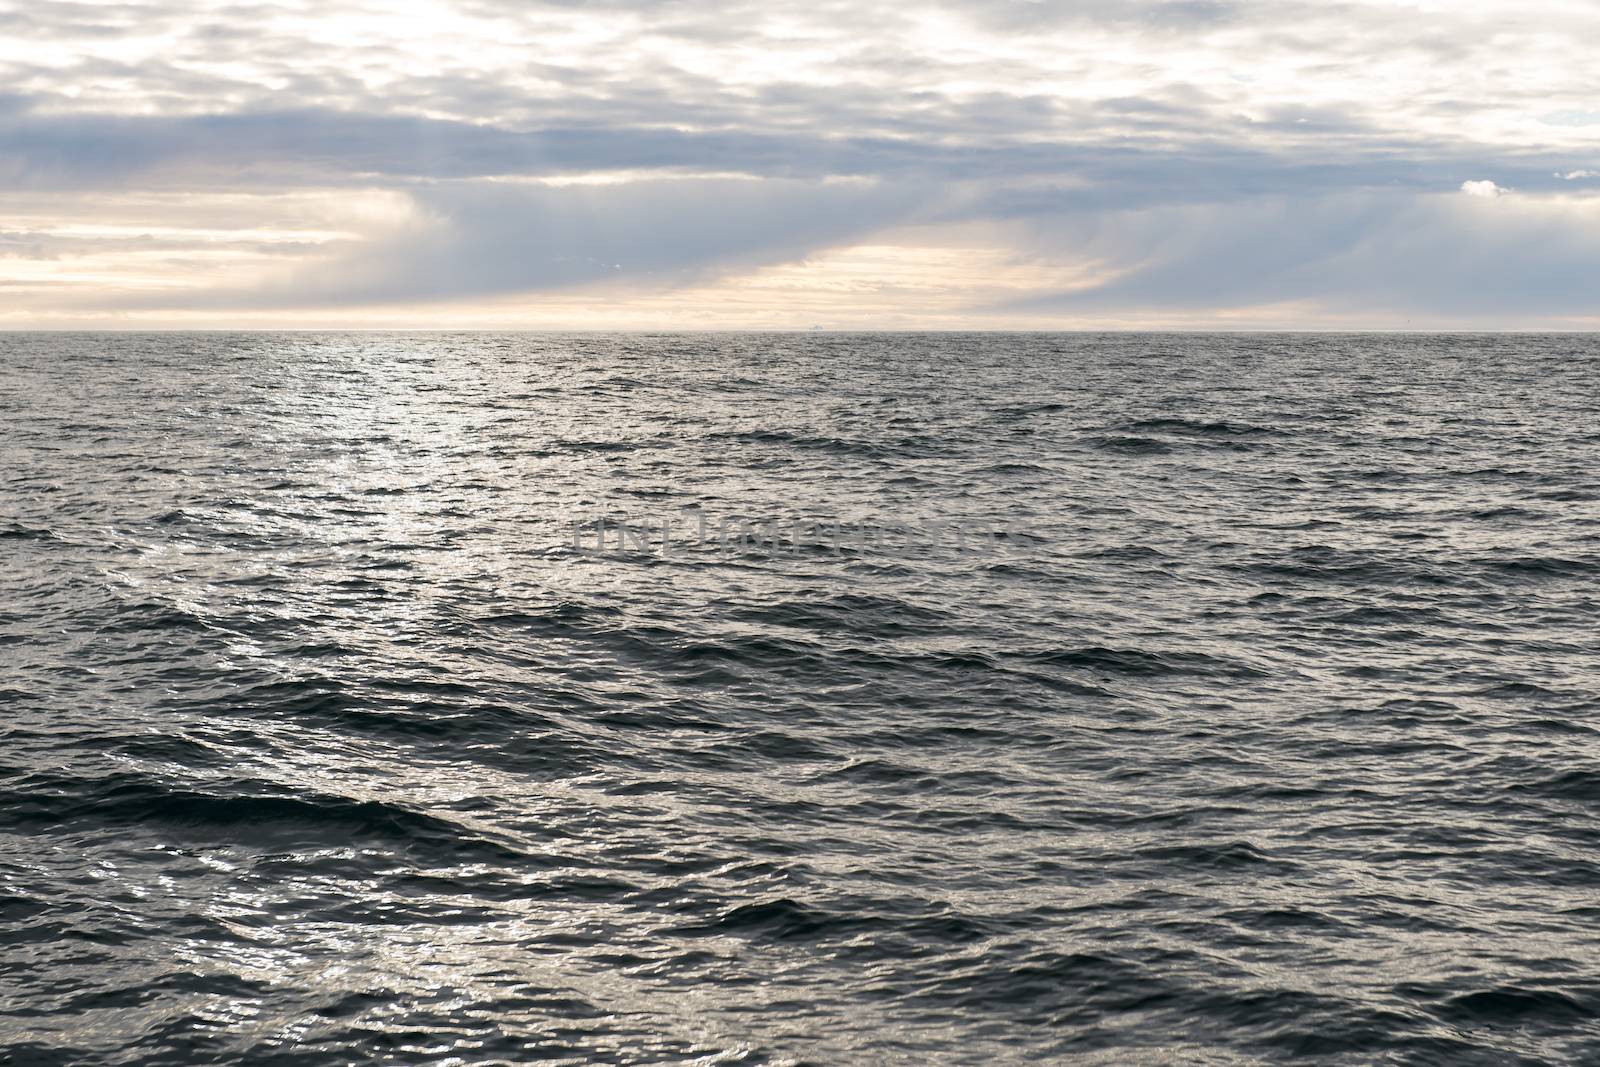 Ocean landscape in the arctic with an intense cloud pattern